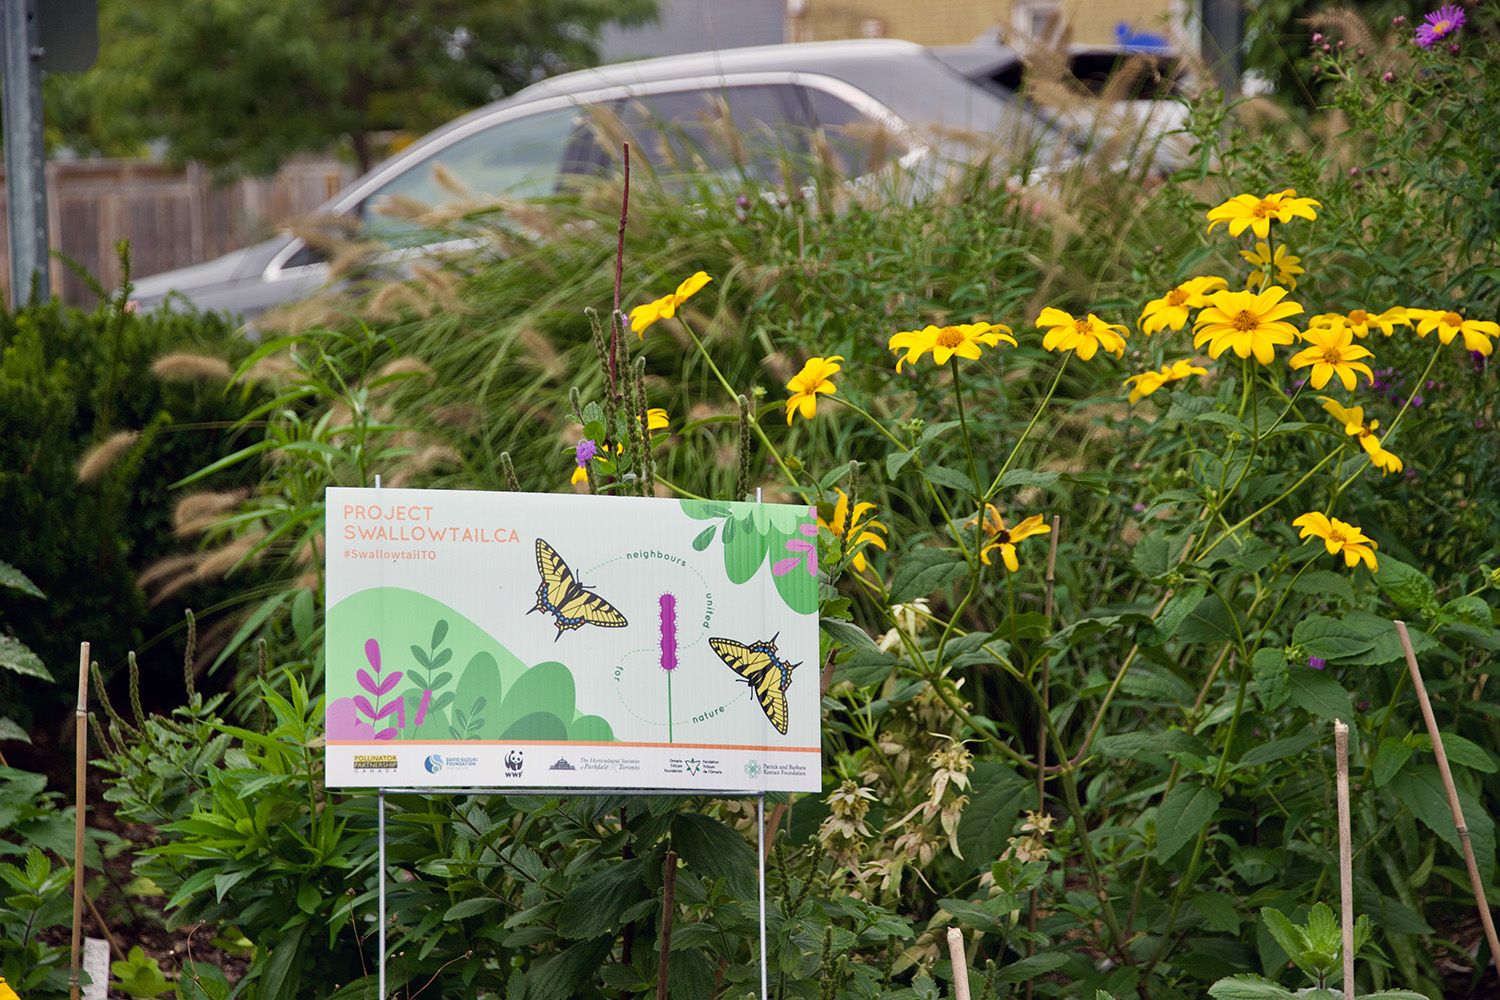 A garden full of greenery and yellow flowers, with a sign that reads "Project Swallowtail.ca: neighbours united for nature".